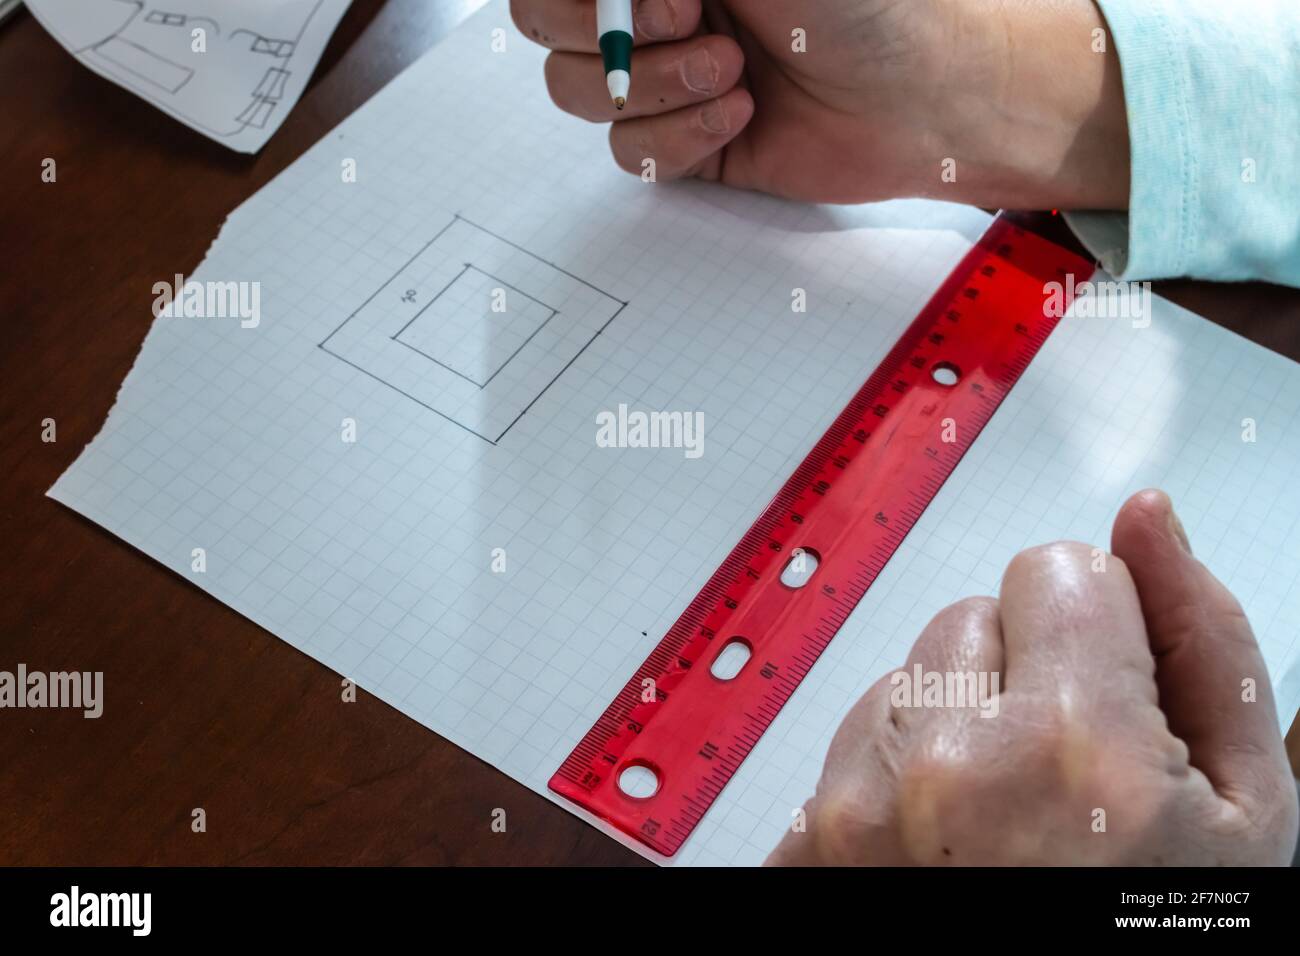 A woman uses a pen to count measurements and sketch out a floor plan for a house on square graph paper using a clear red ruler on hardwood desk. Stock Photo